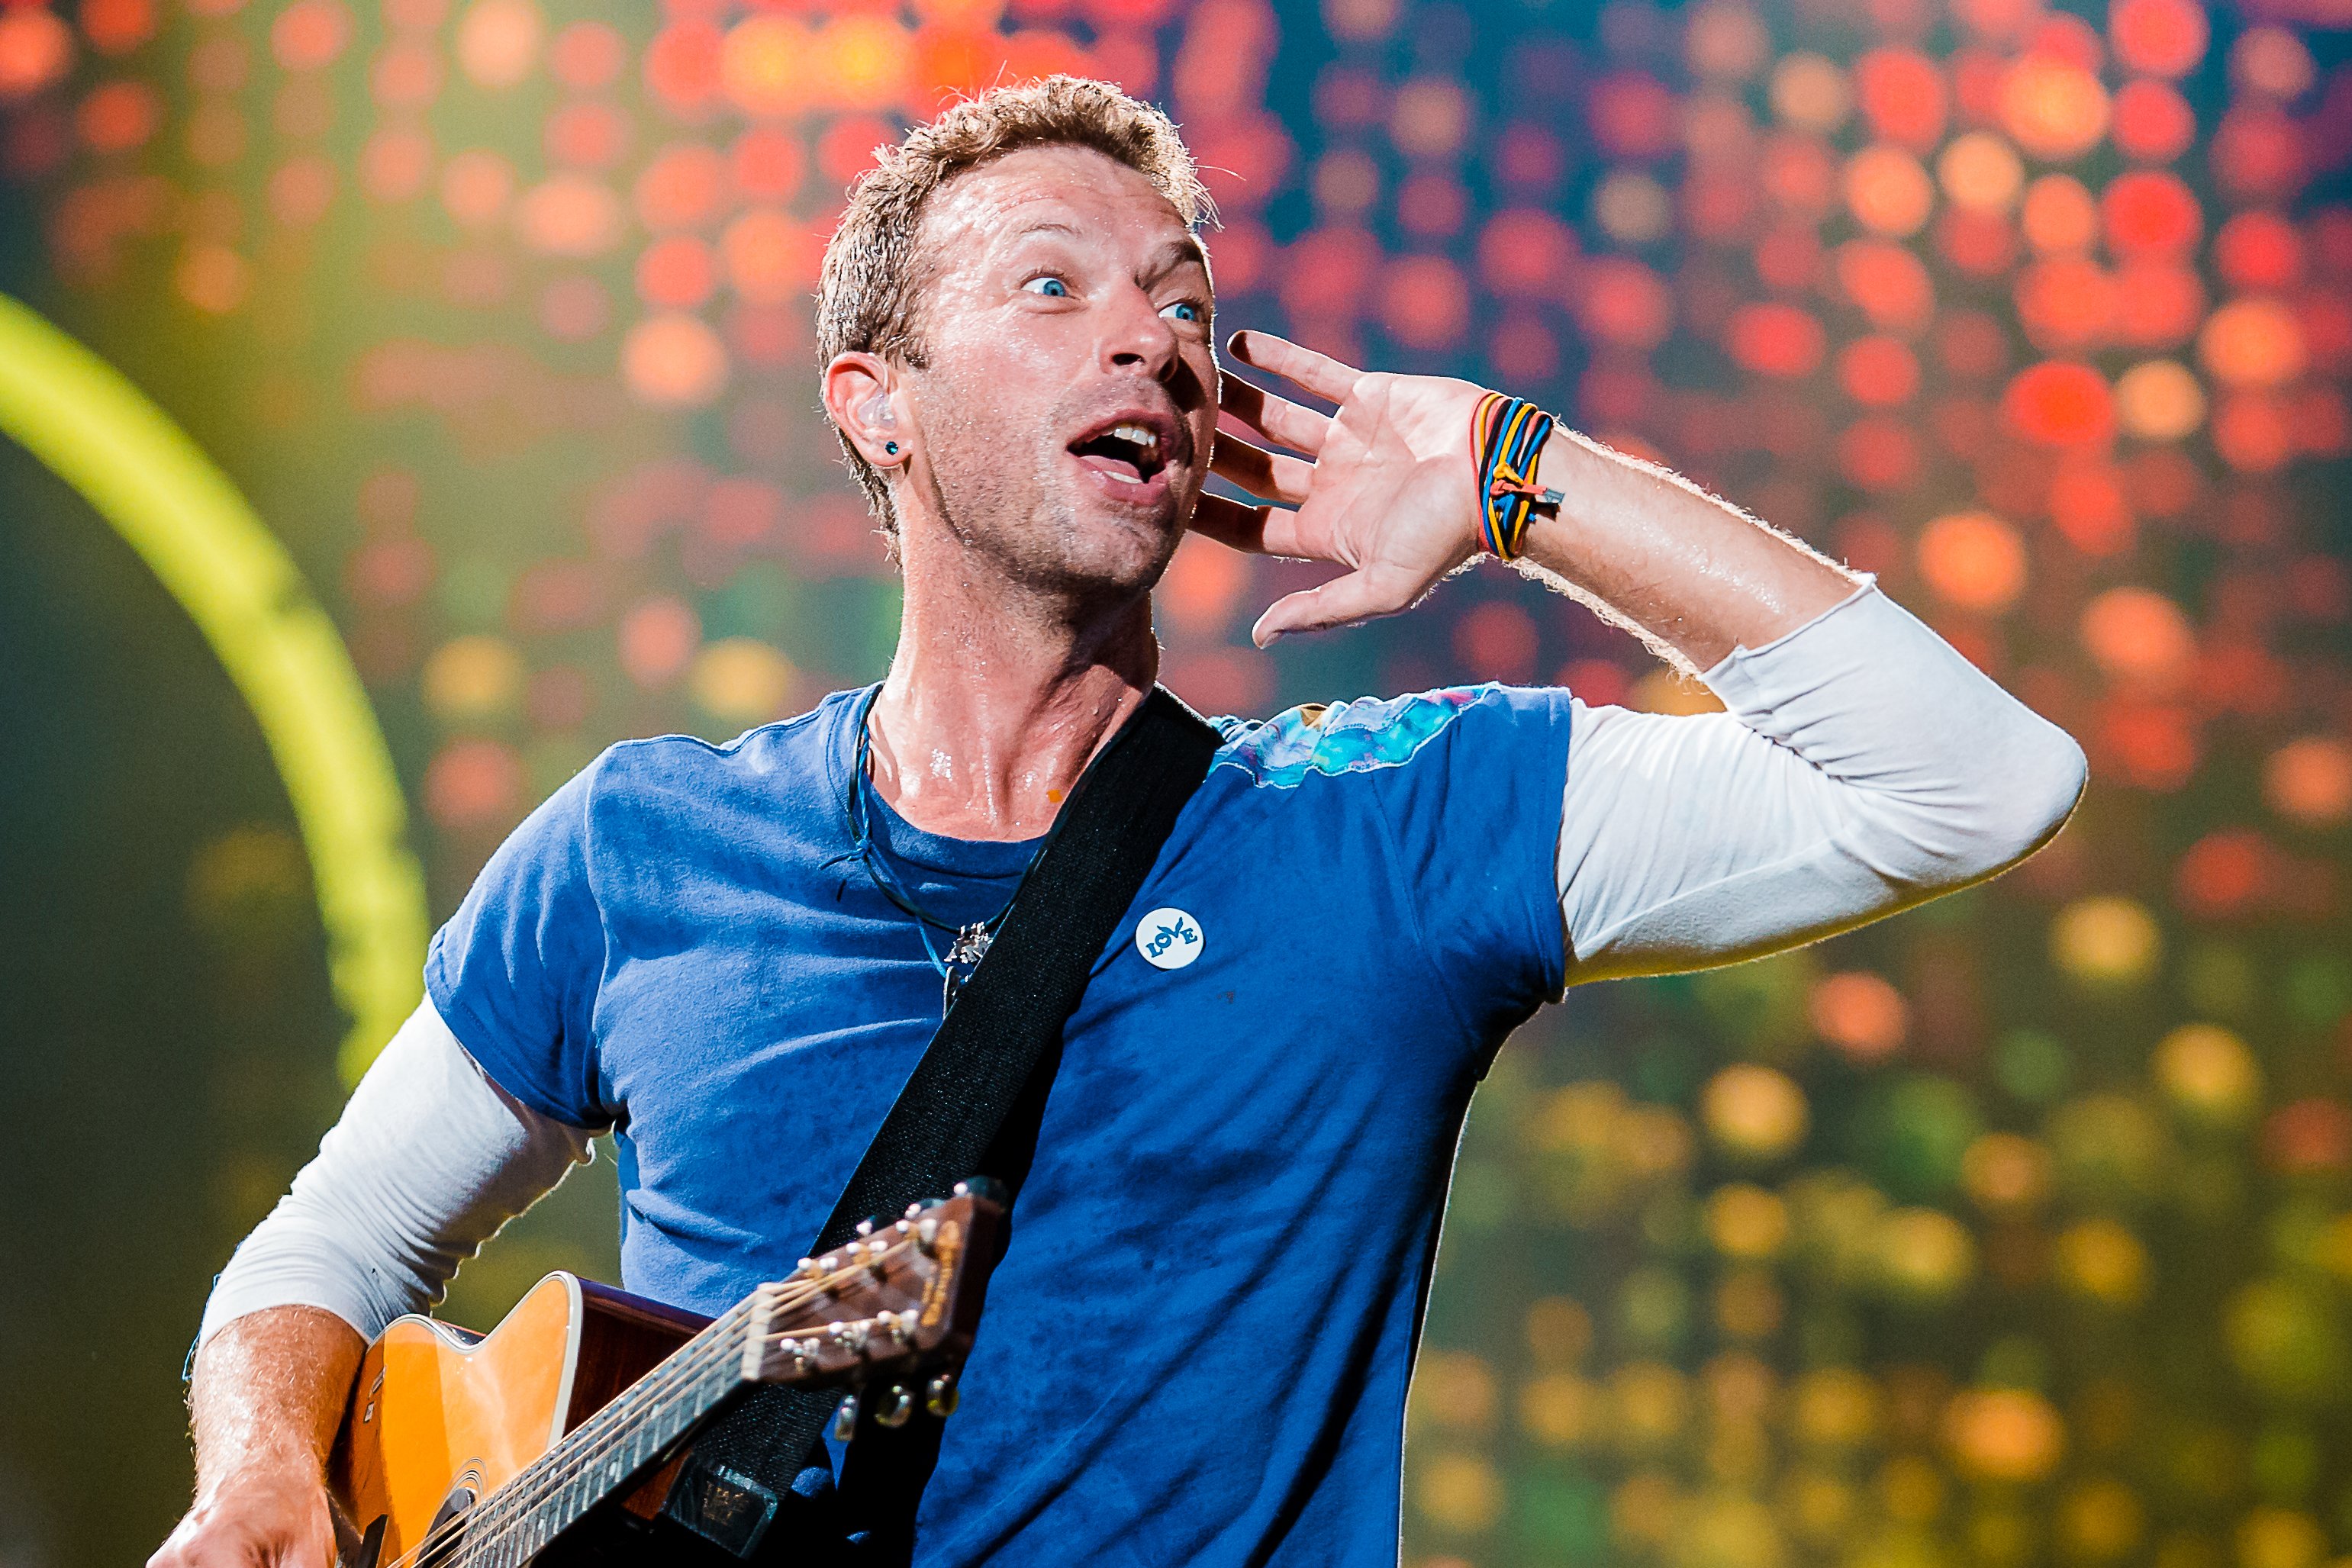 Chris Martin during a 2017 performance in Brazil. | Photo: Getty Images